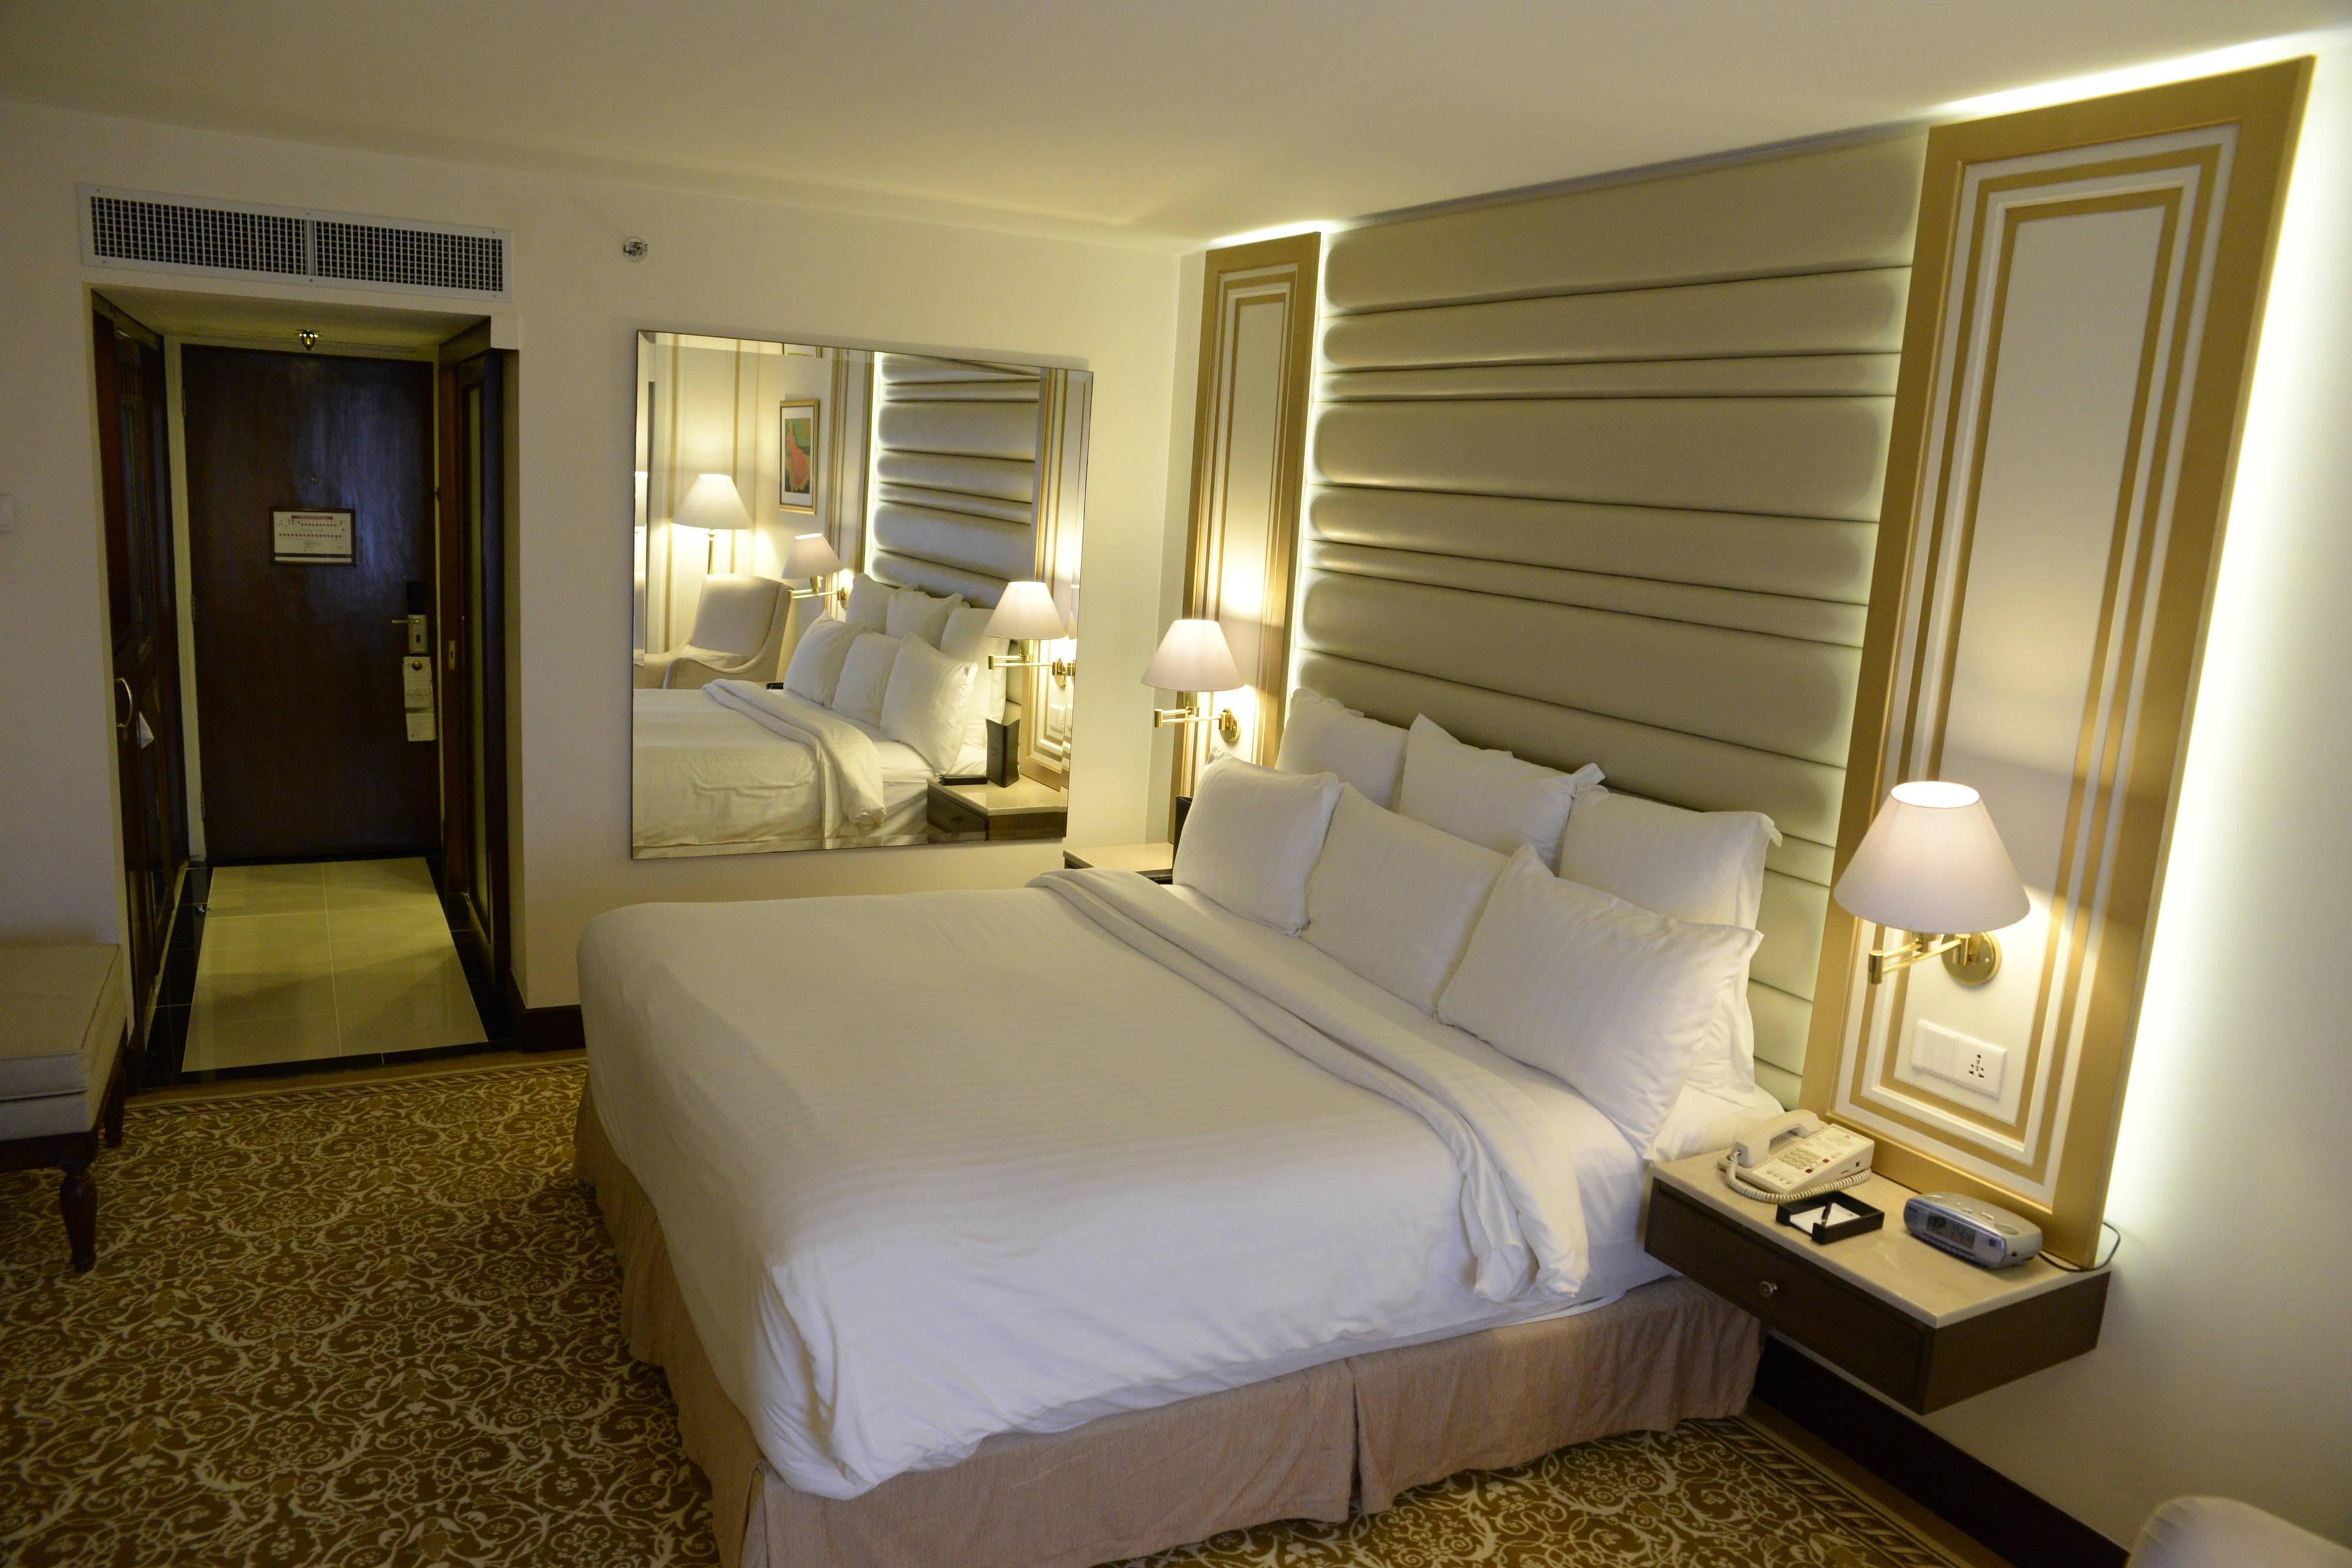 Our deluxe king guest rooms are newly renovated spacious rooms with a working desk and LED screen to cater to all the entertaining needs of our guest.